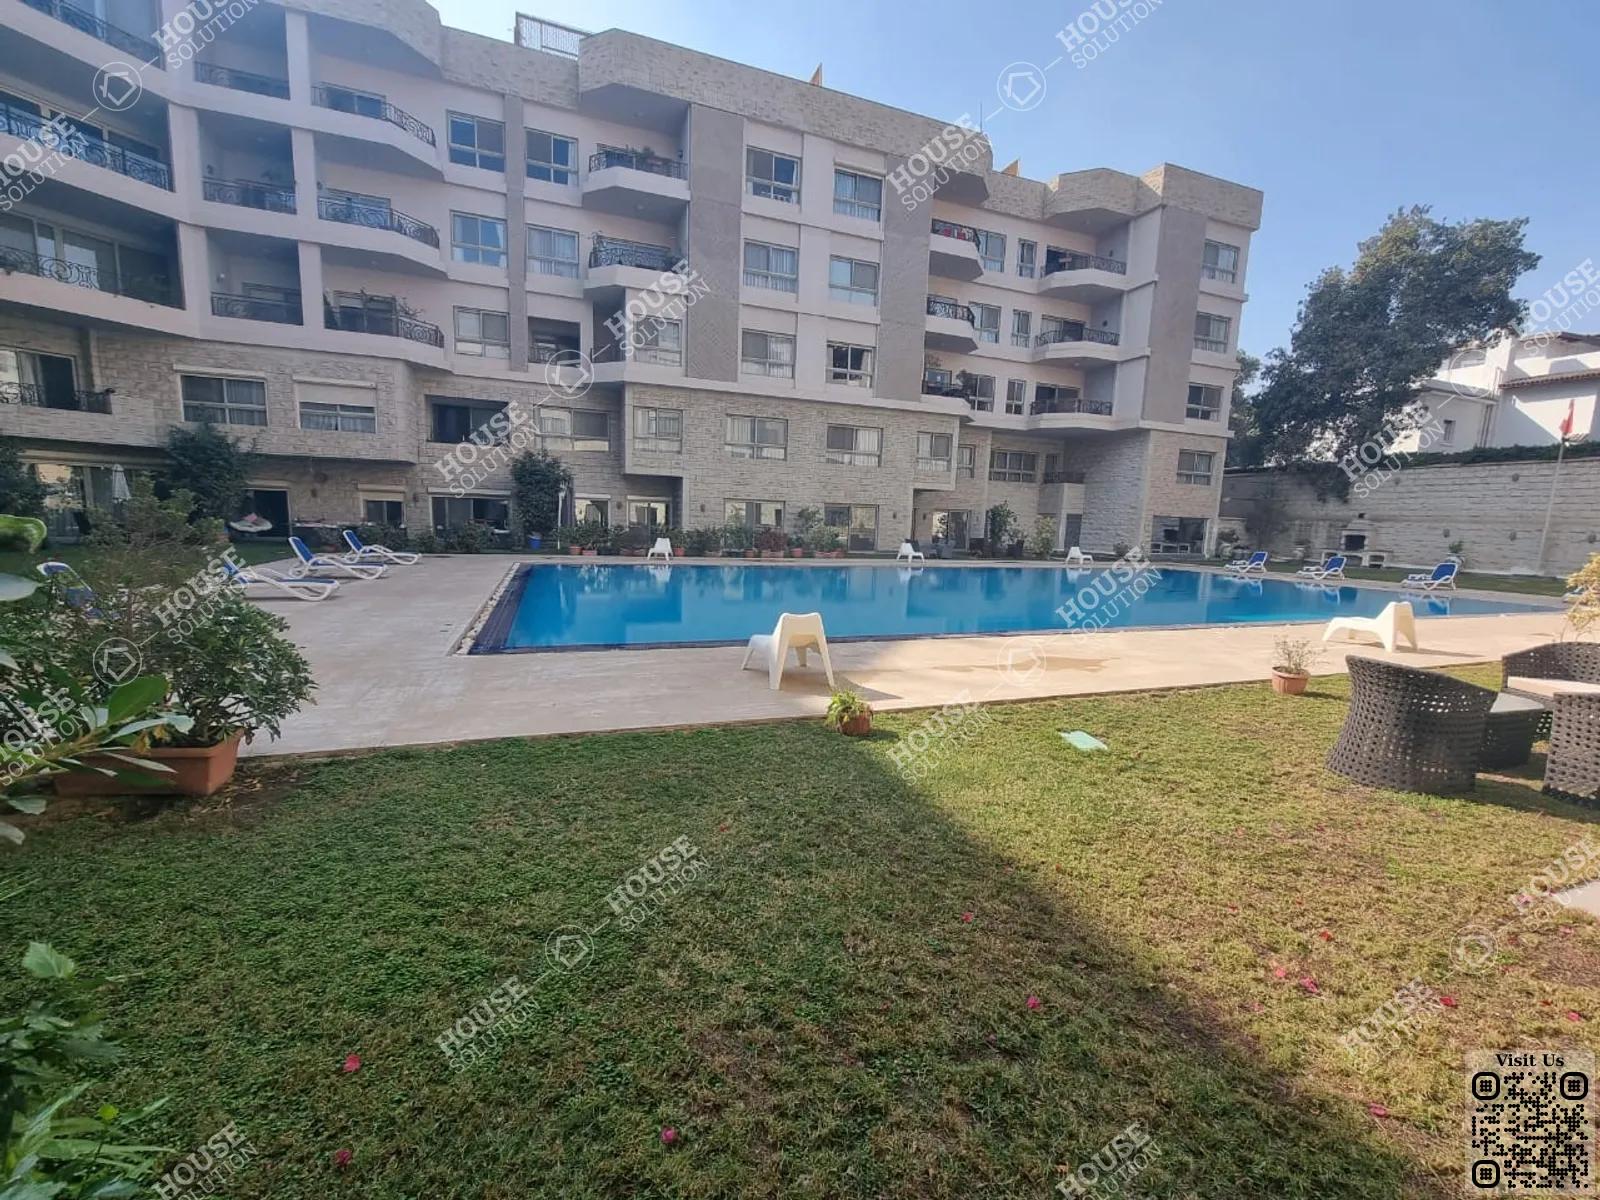 SHARED SWIMMING POOL  @ Ground Floors For Rent In Maadi Maadi Sarayat Area: 200 m² consists of 3 Bedrooms 3 Bathrooms Modern furnished 5 stars #5651-2